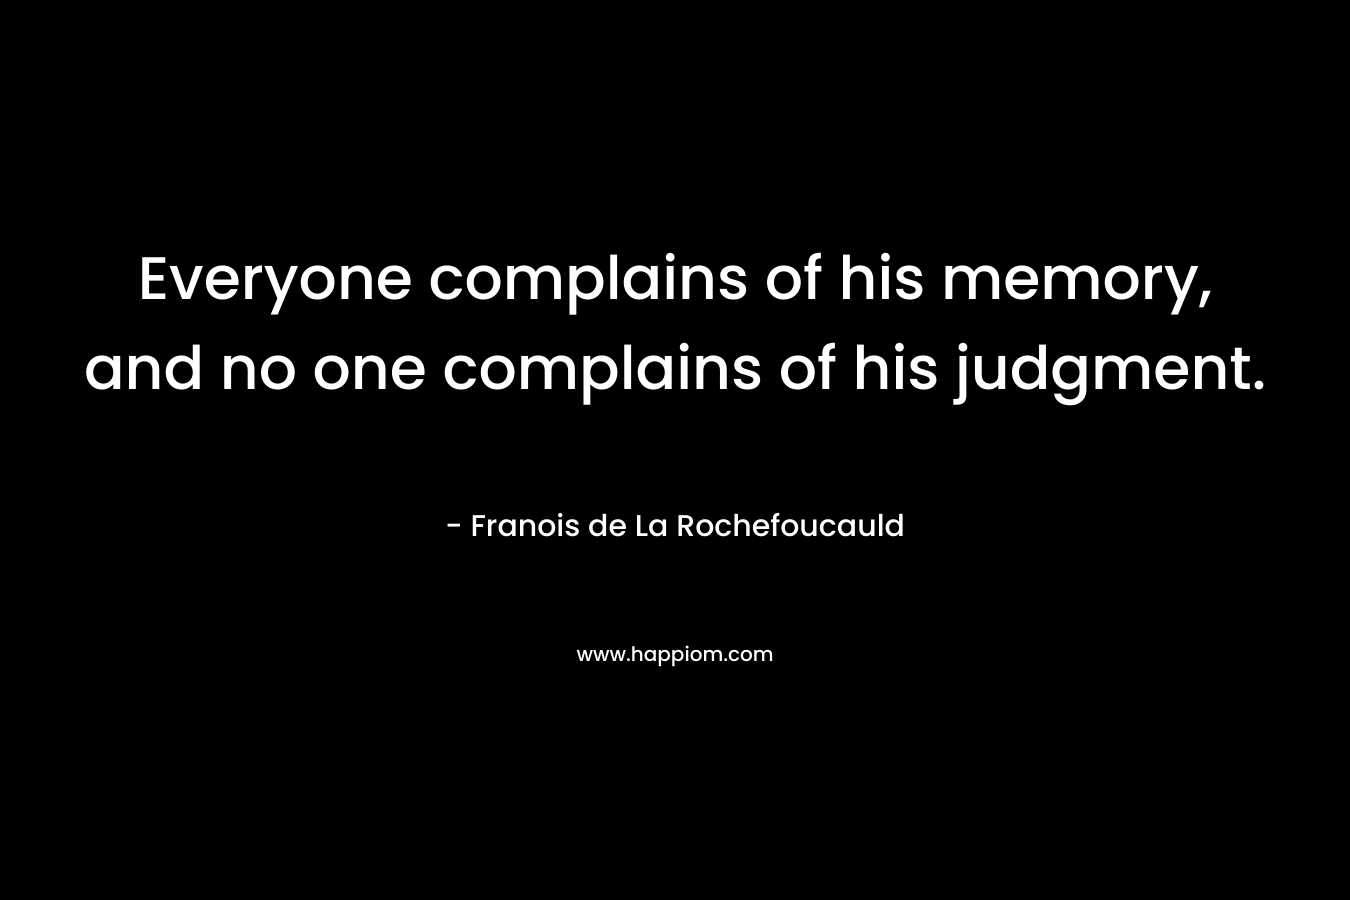 Everyone complains of his memory, and no one complains of his judgment. – Franois de La Rochefoucauld